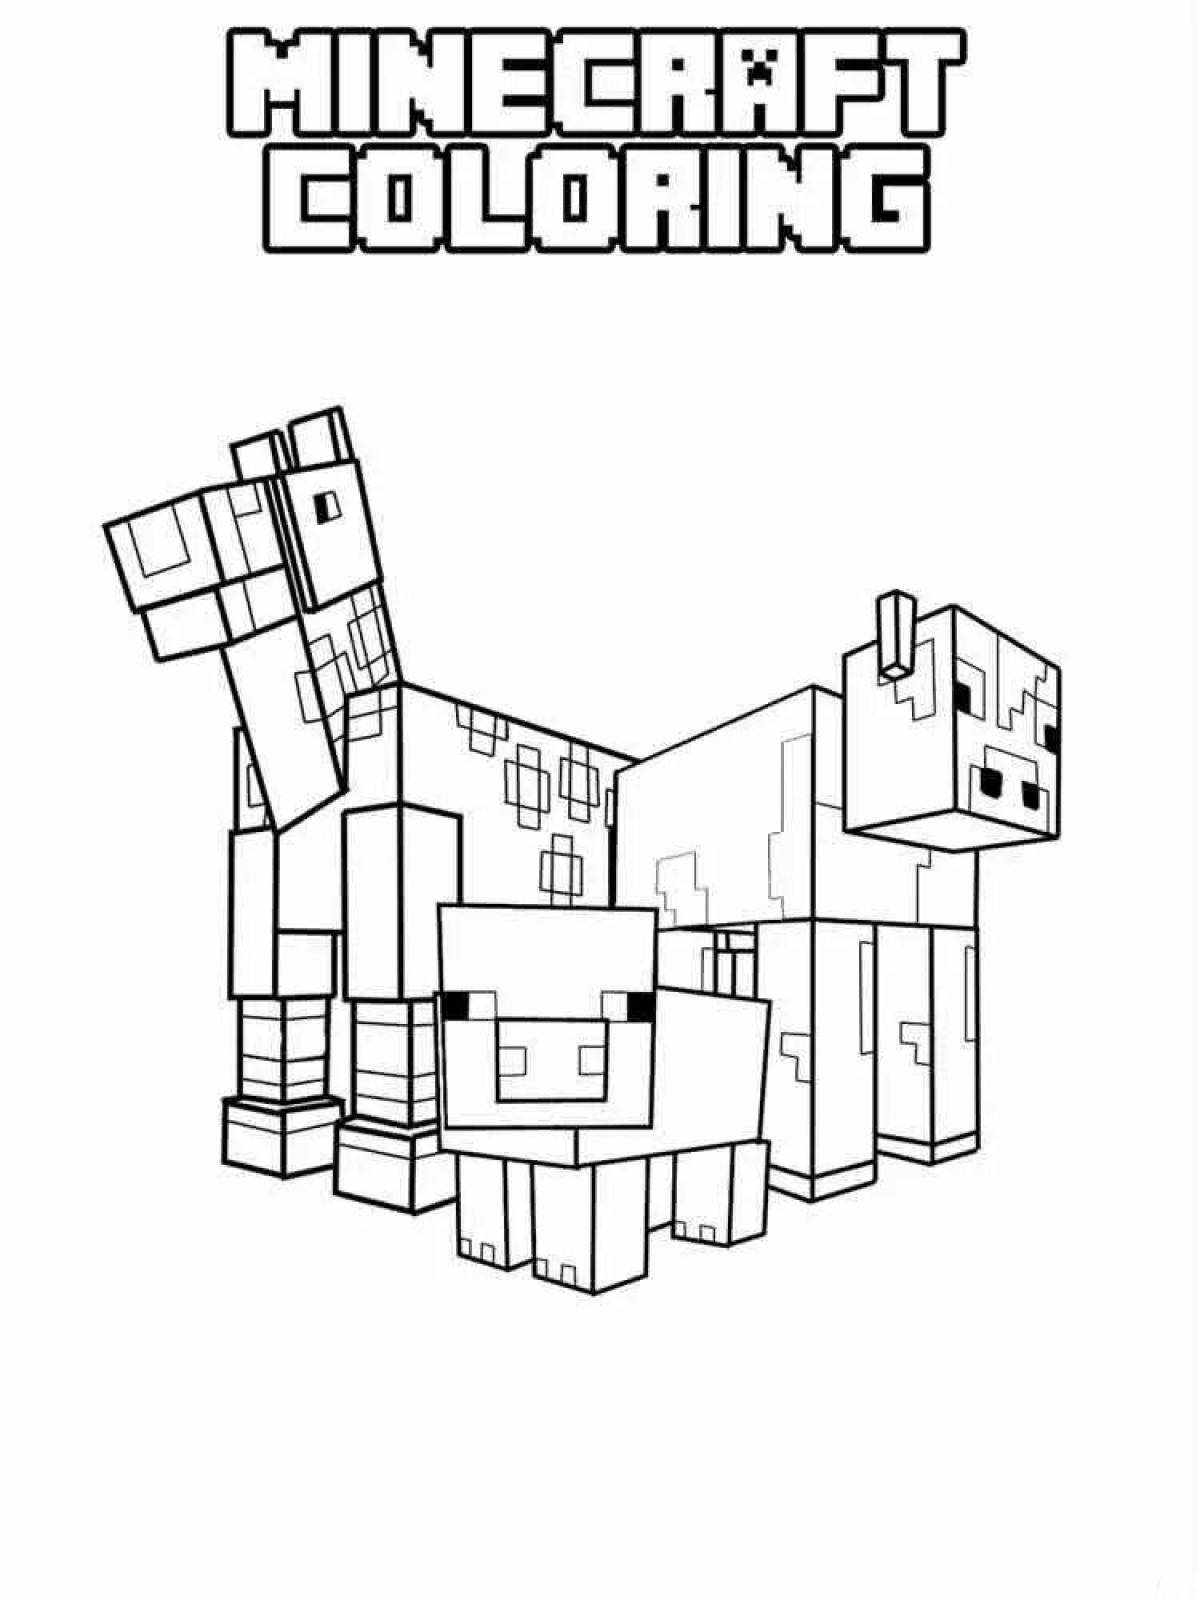 Fascinating minecraft horse coloring page